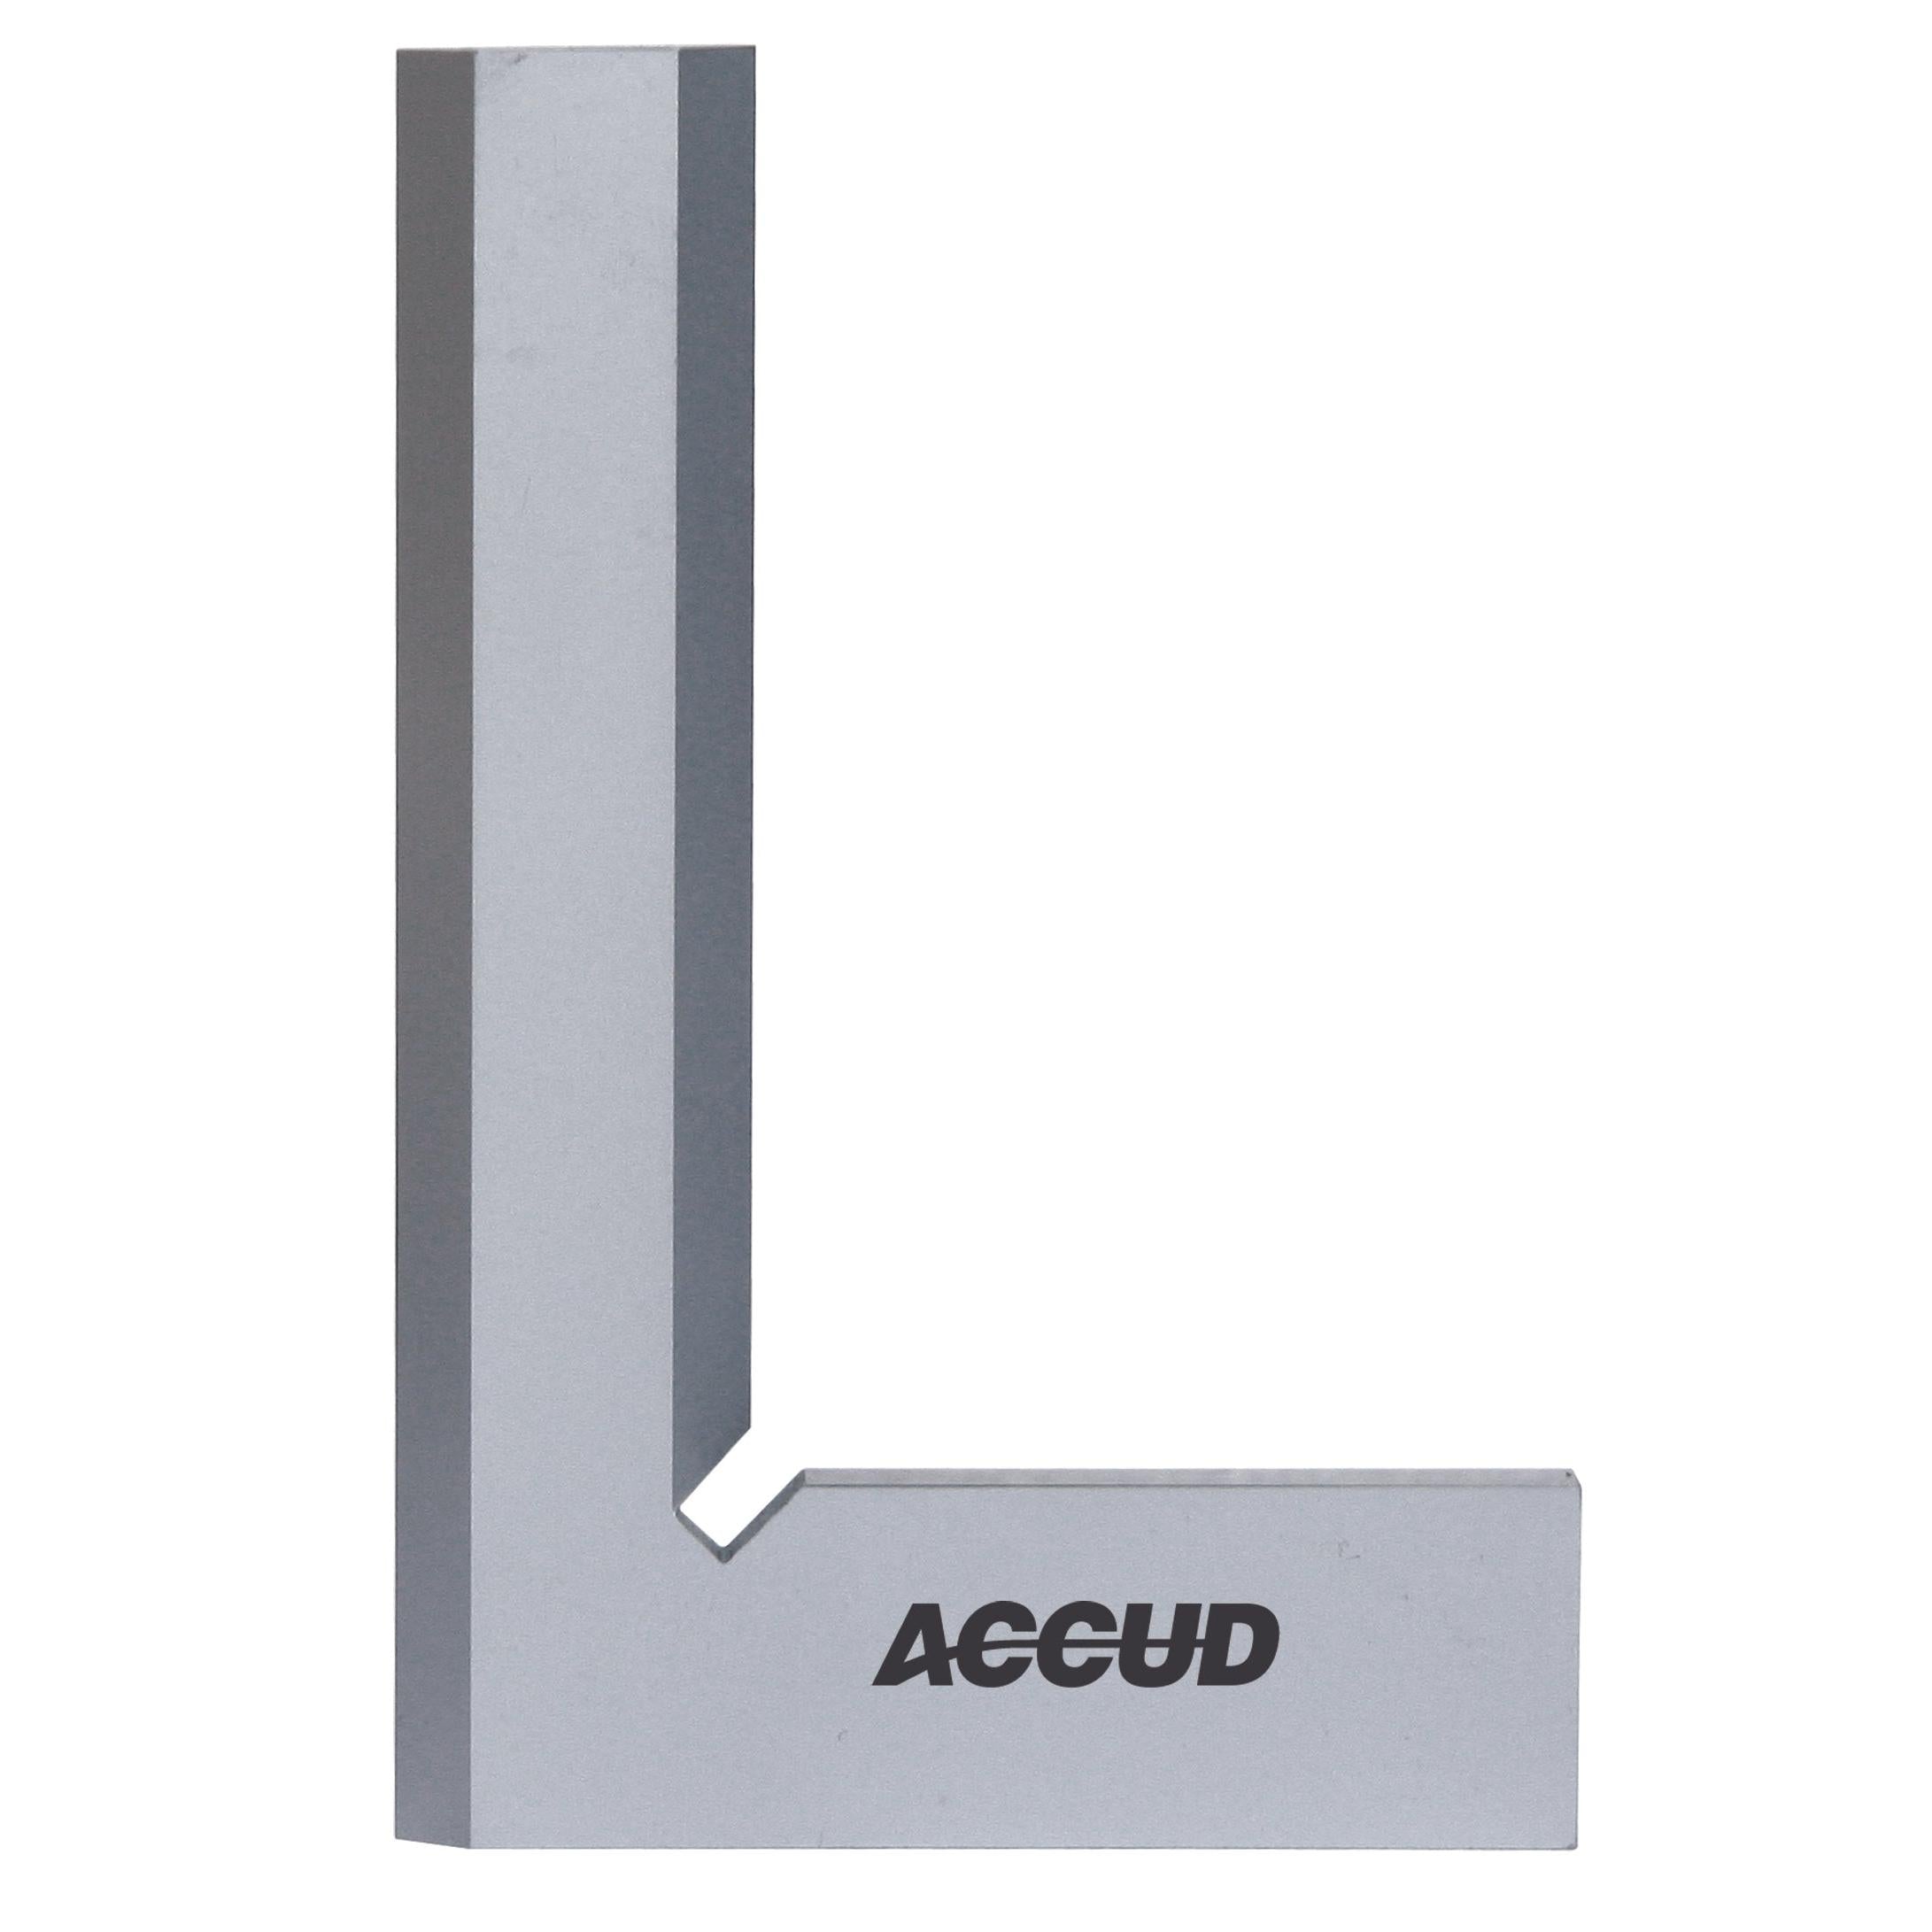 ACCUD | Beveled Edge Square 50X40Mm | 832-002-10 Power Tool Services